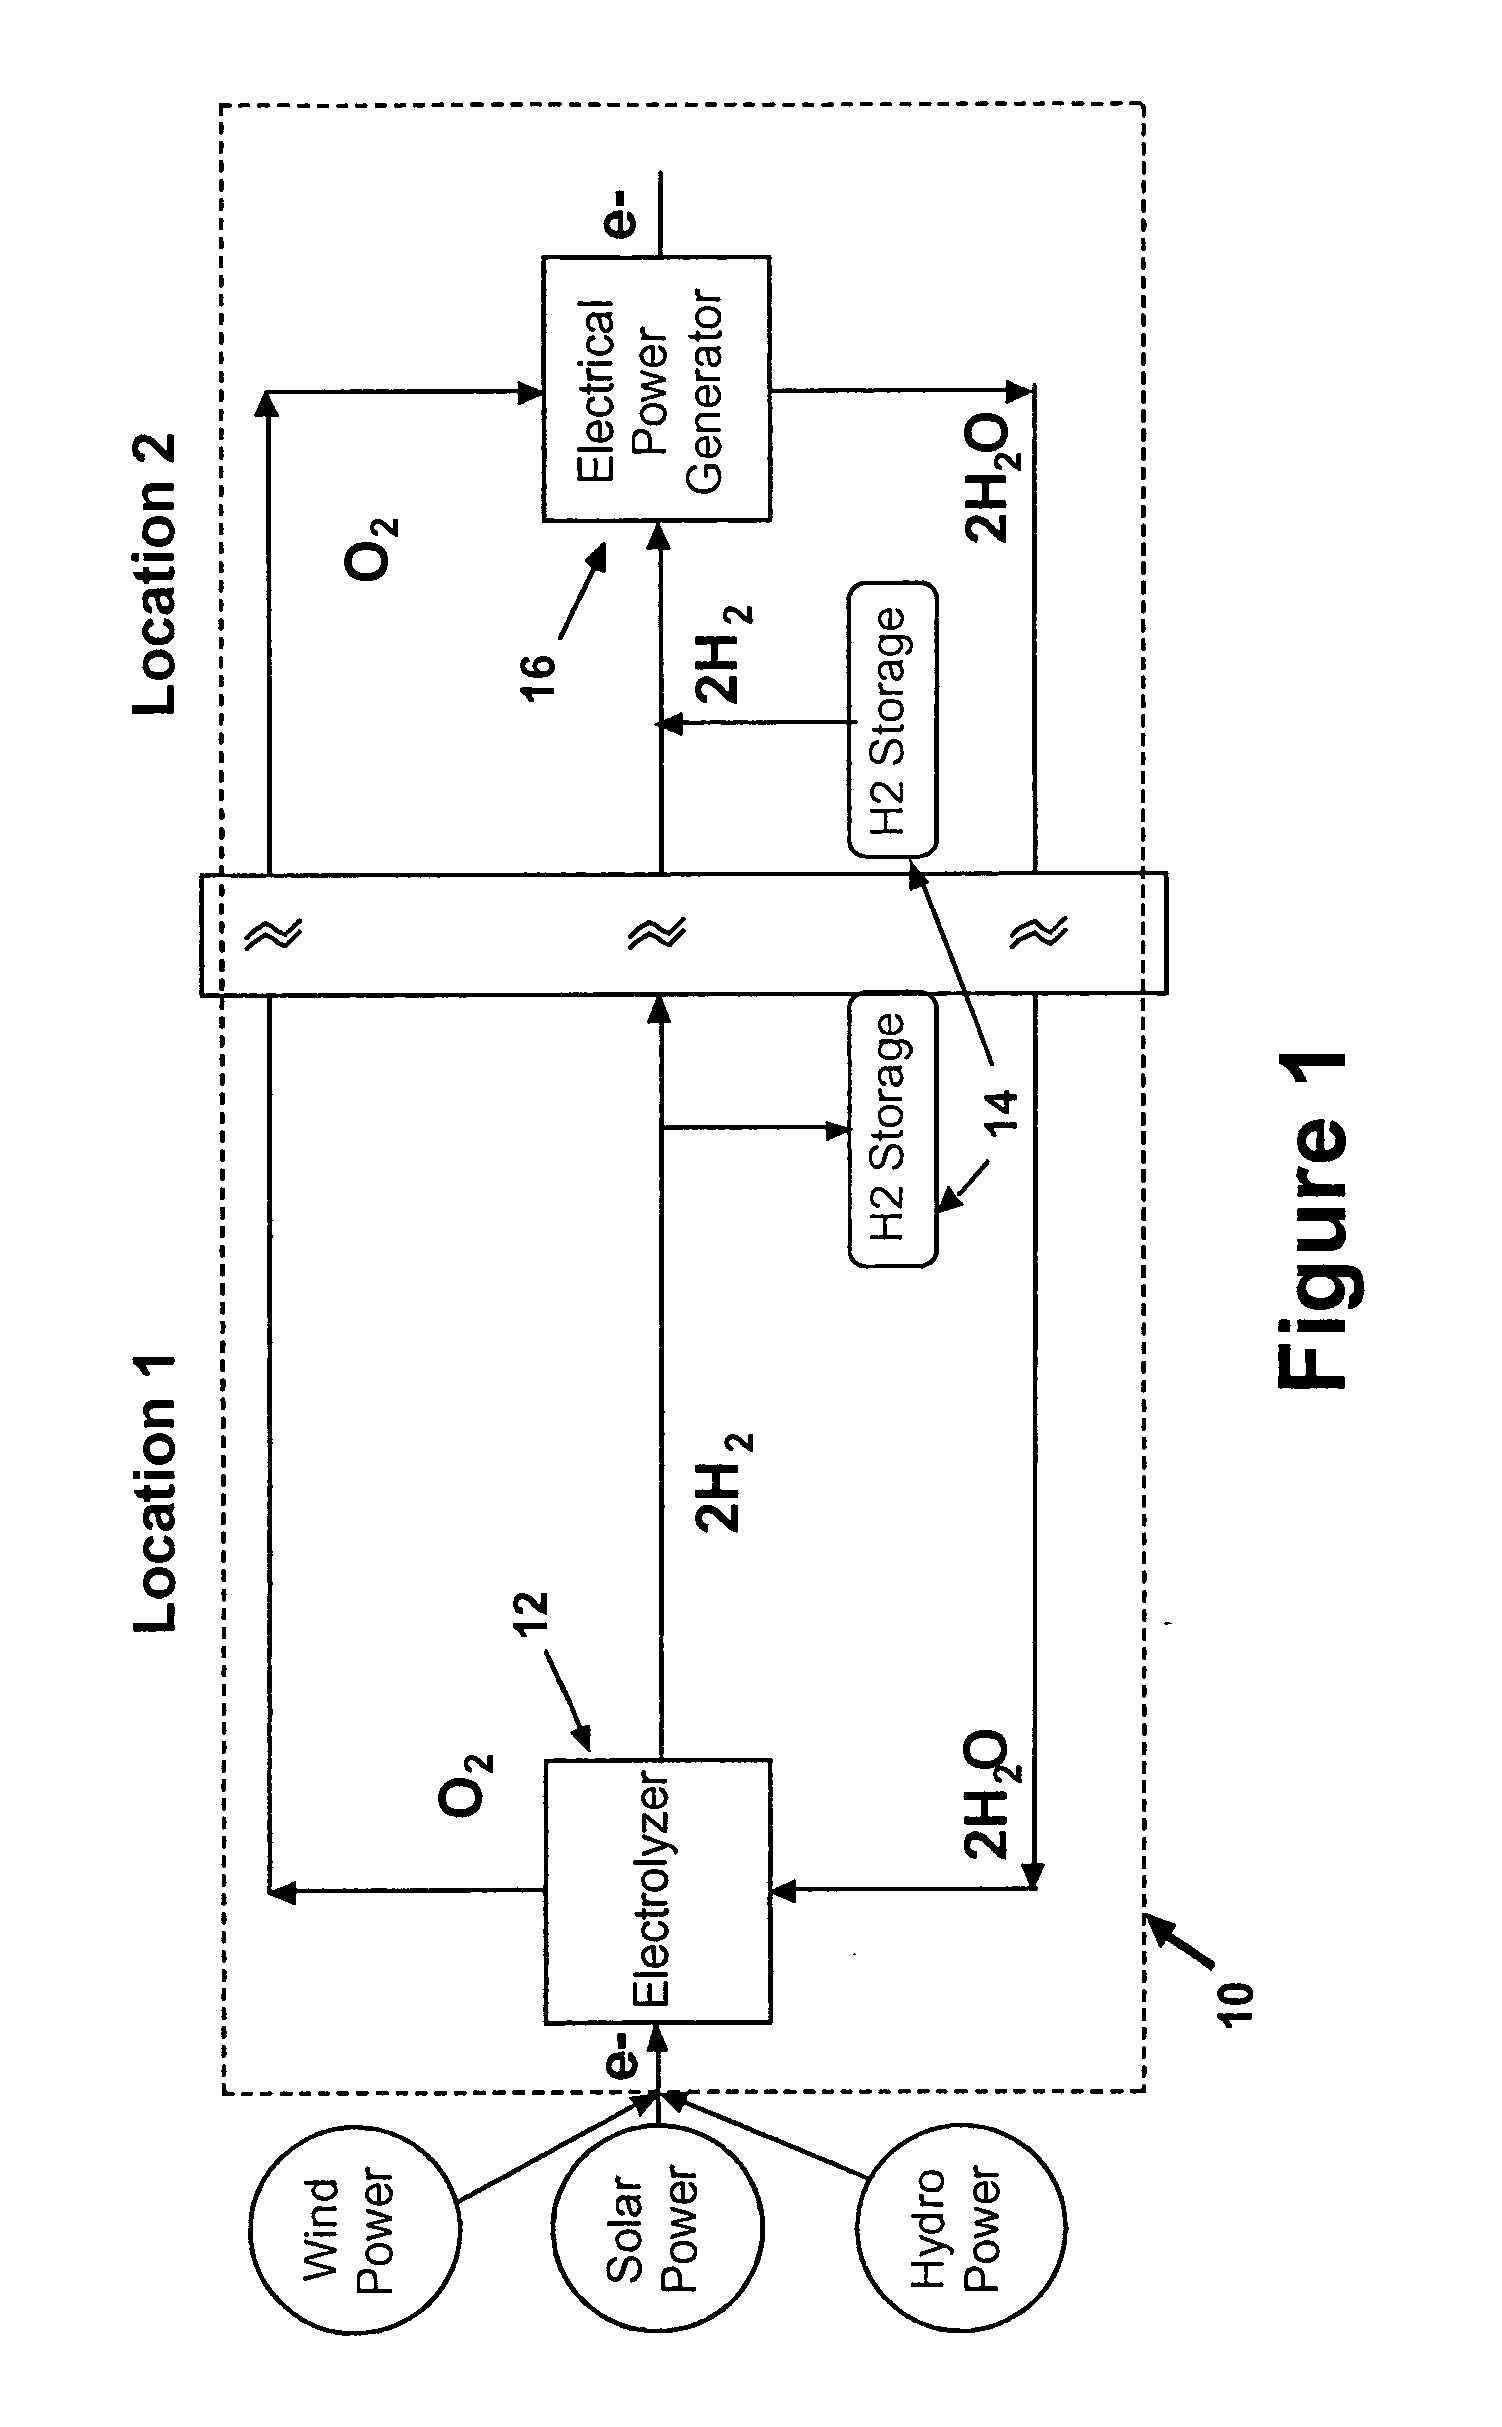 Material neutral power generation